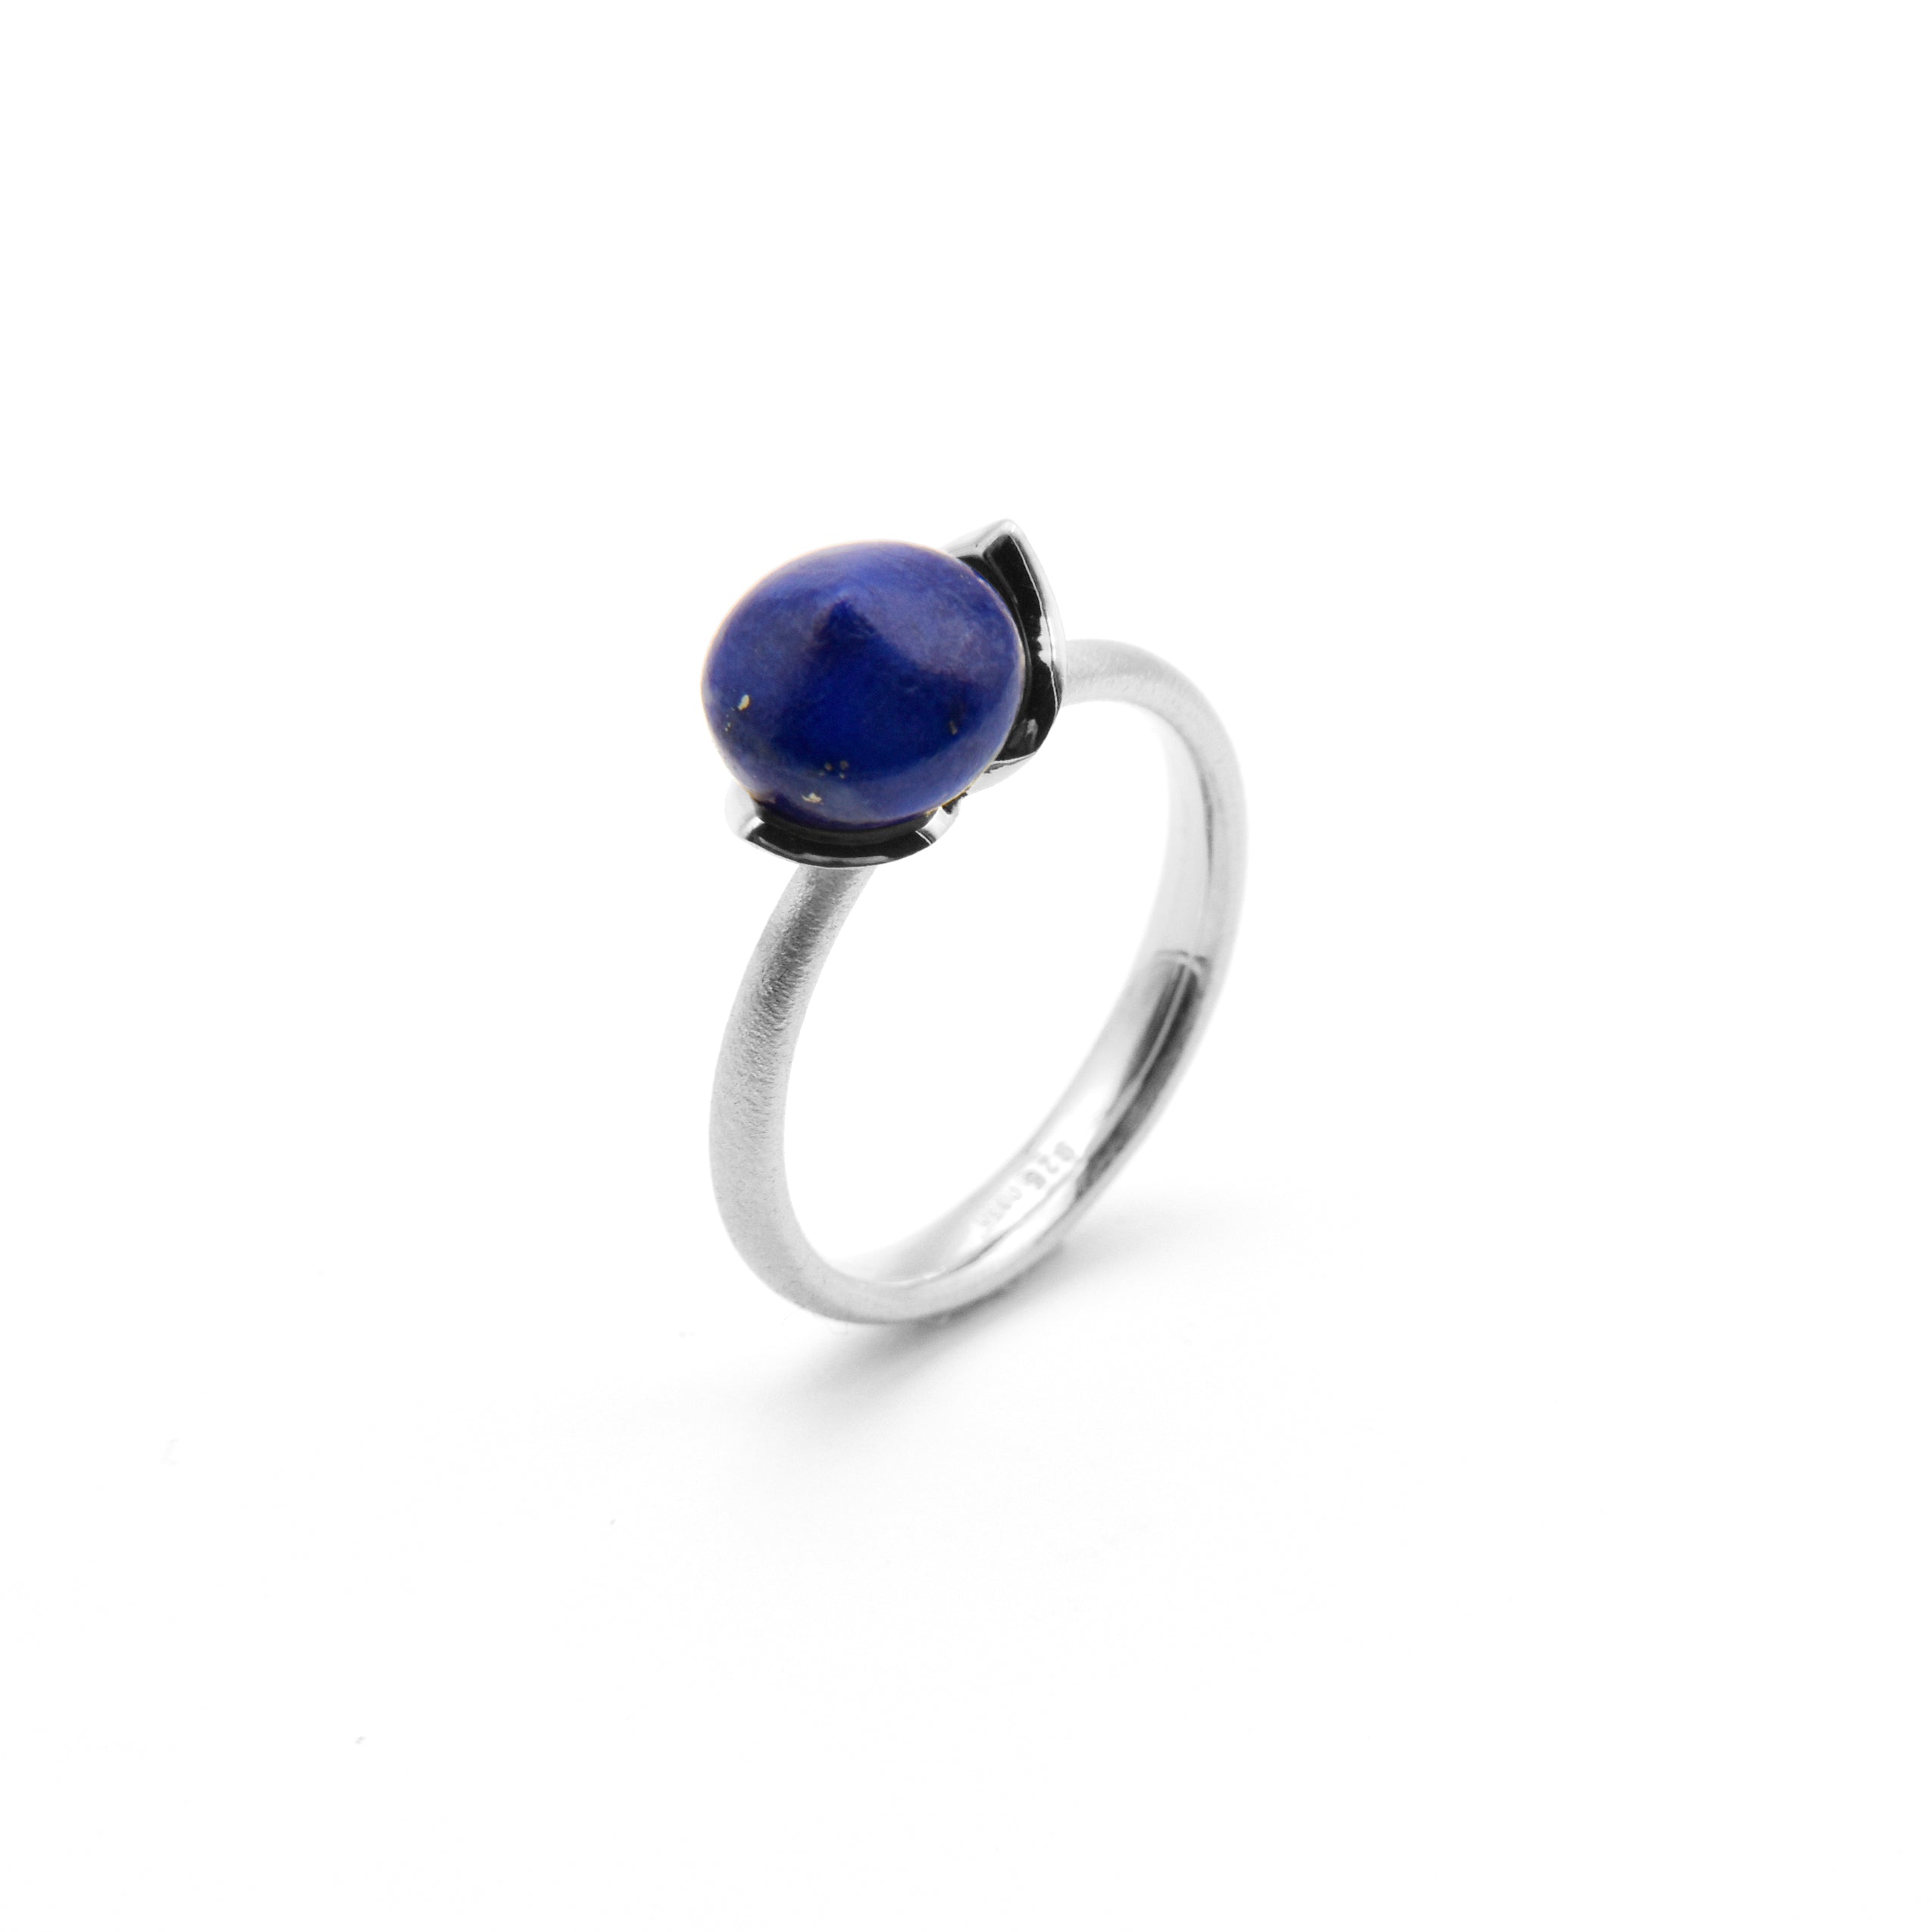 Dolce ring "smal" with lapis lazuli 925/-